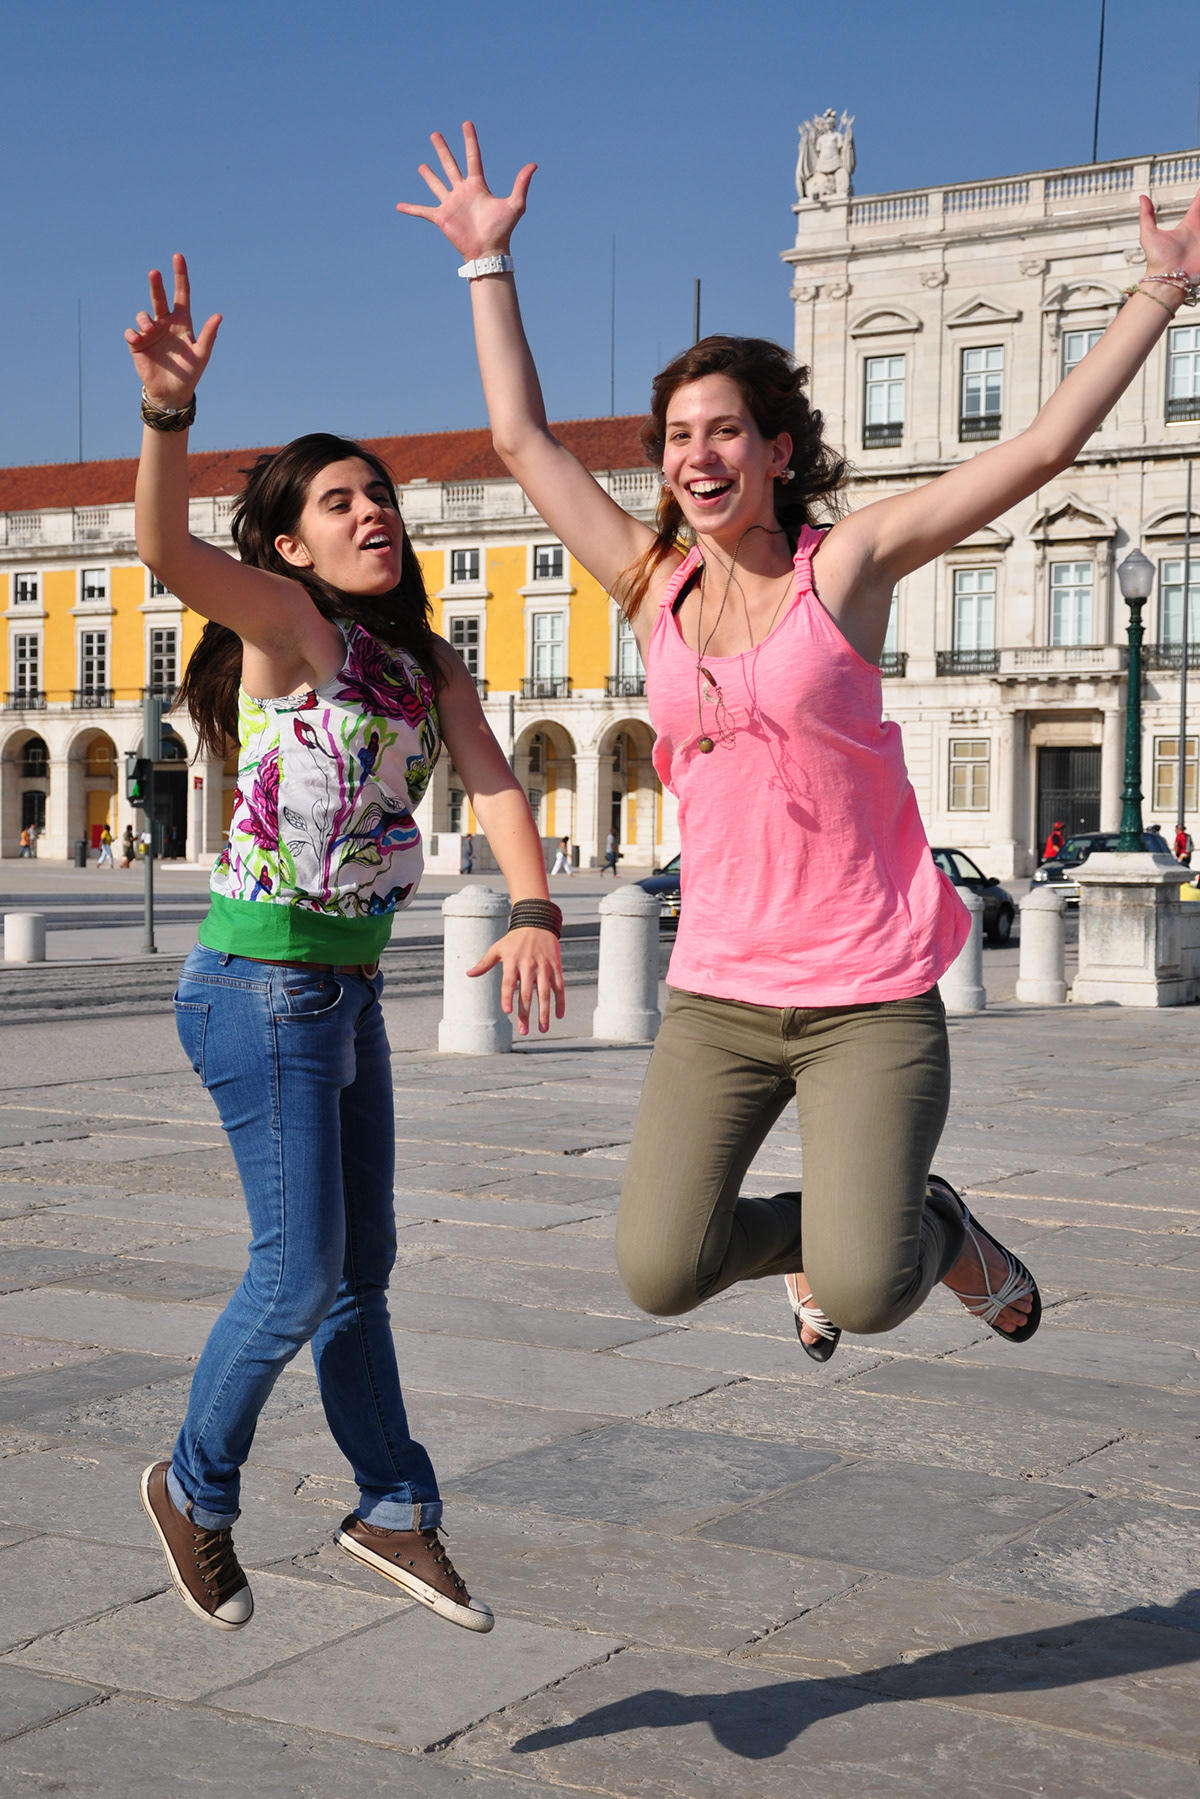 Turismo turistic photo Lisbon portrait couple Young people Fun vacations